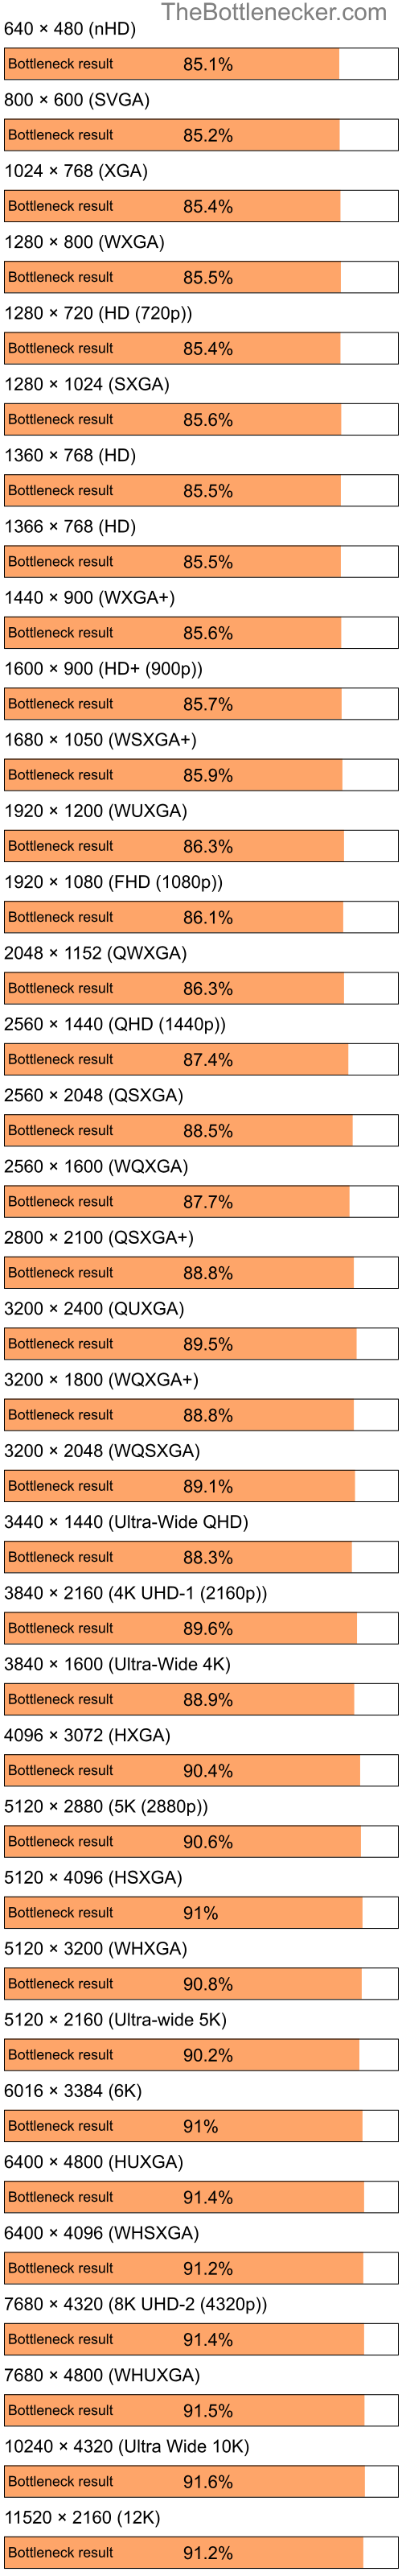 Bottleneck results by resolution for Intel Pentium 4 and NVIDIA GeForce4 MX Integrated GPU in Processor Intense Tasks